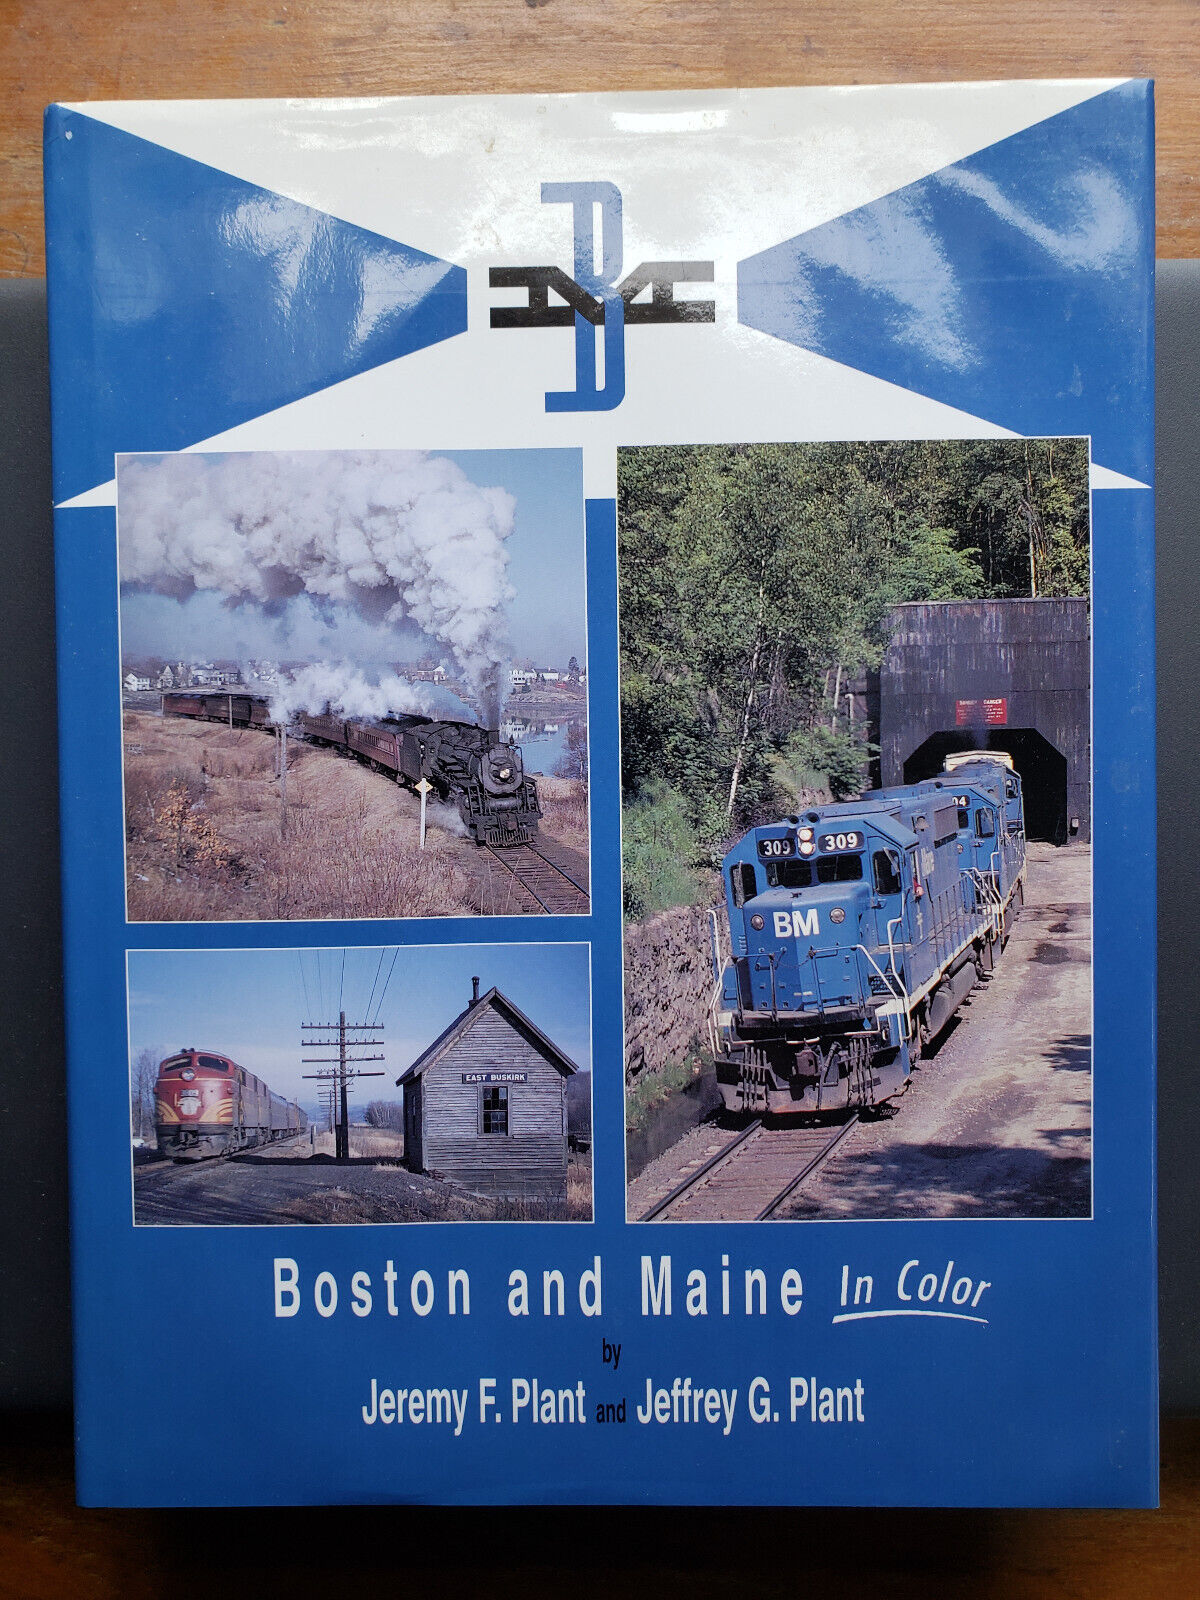 Boston and Maine in Color by Jeremy F. Plant and Jeffrey G. Plant